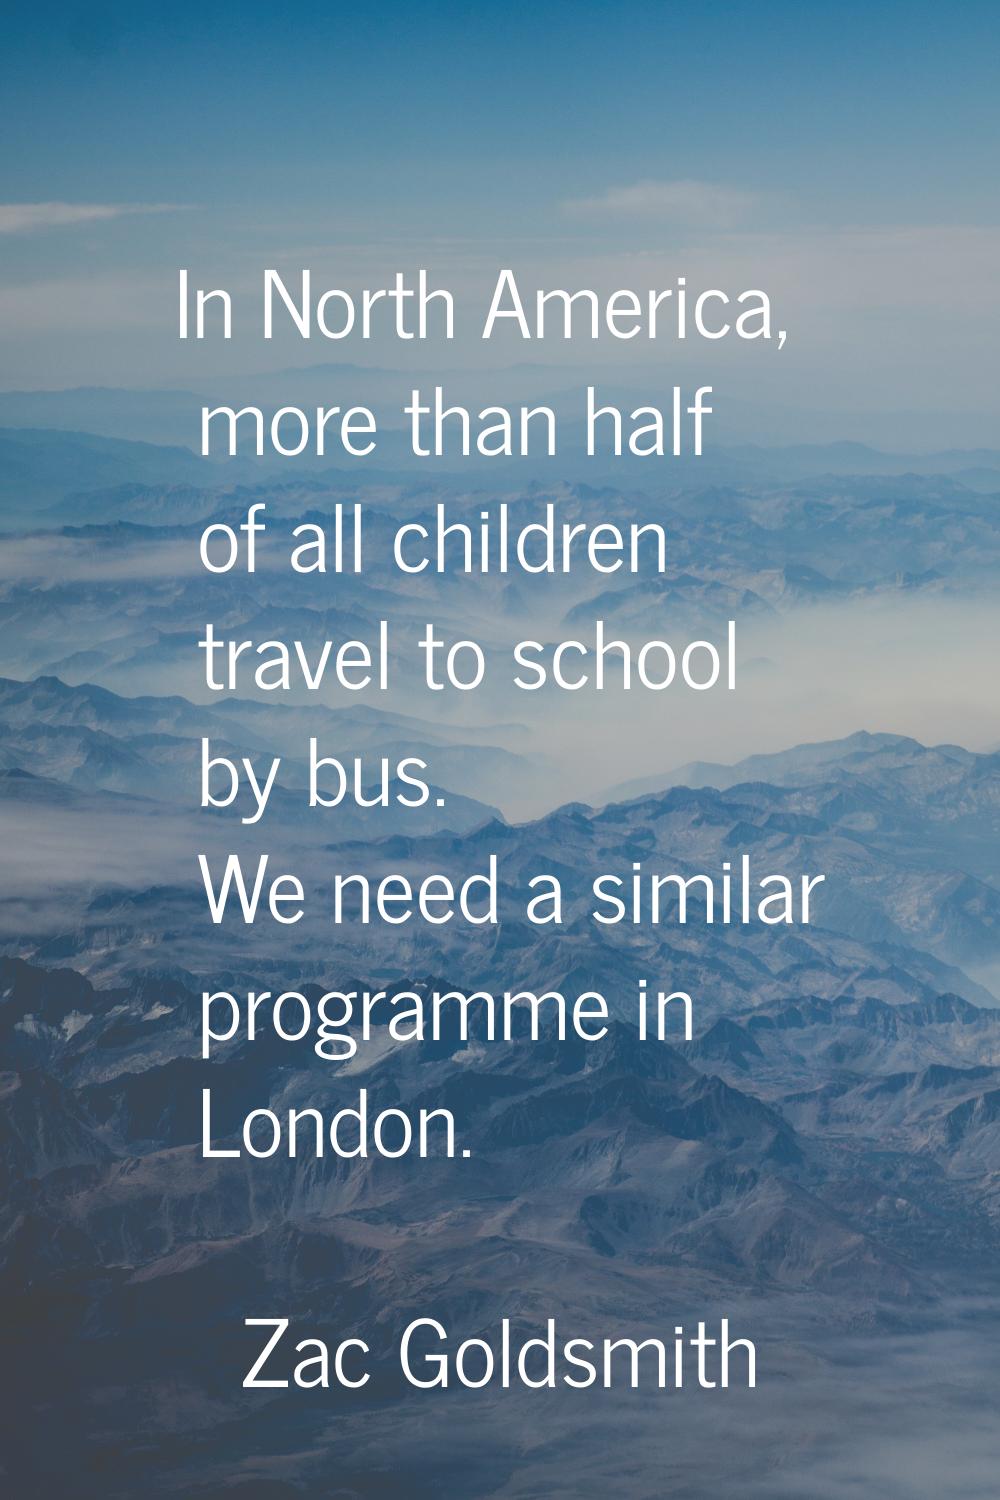 In North America, more than half of all children travel to school by bus. We need a similar program